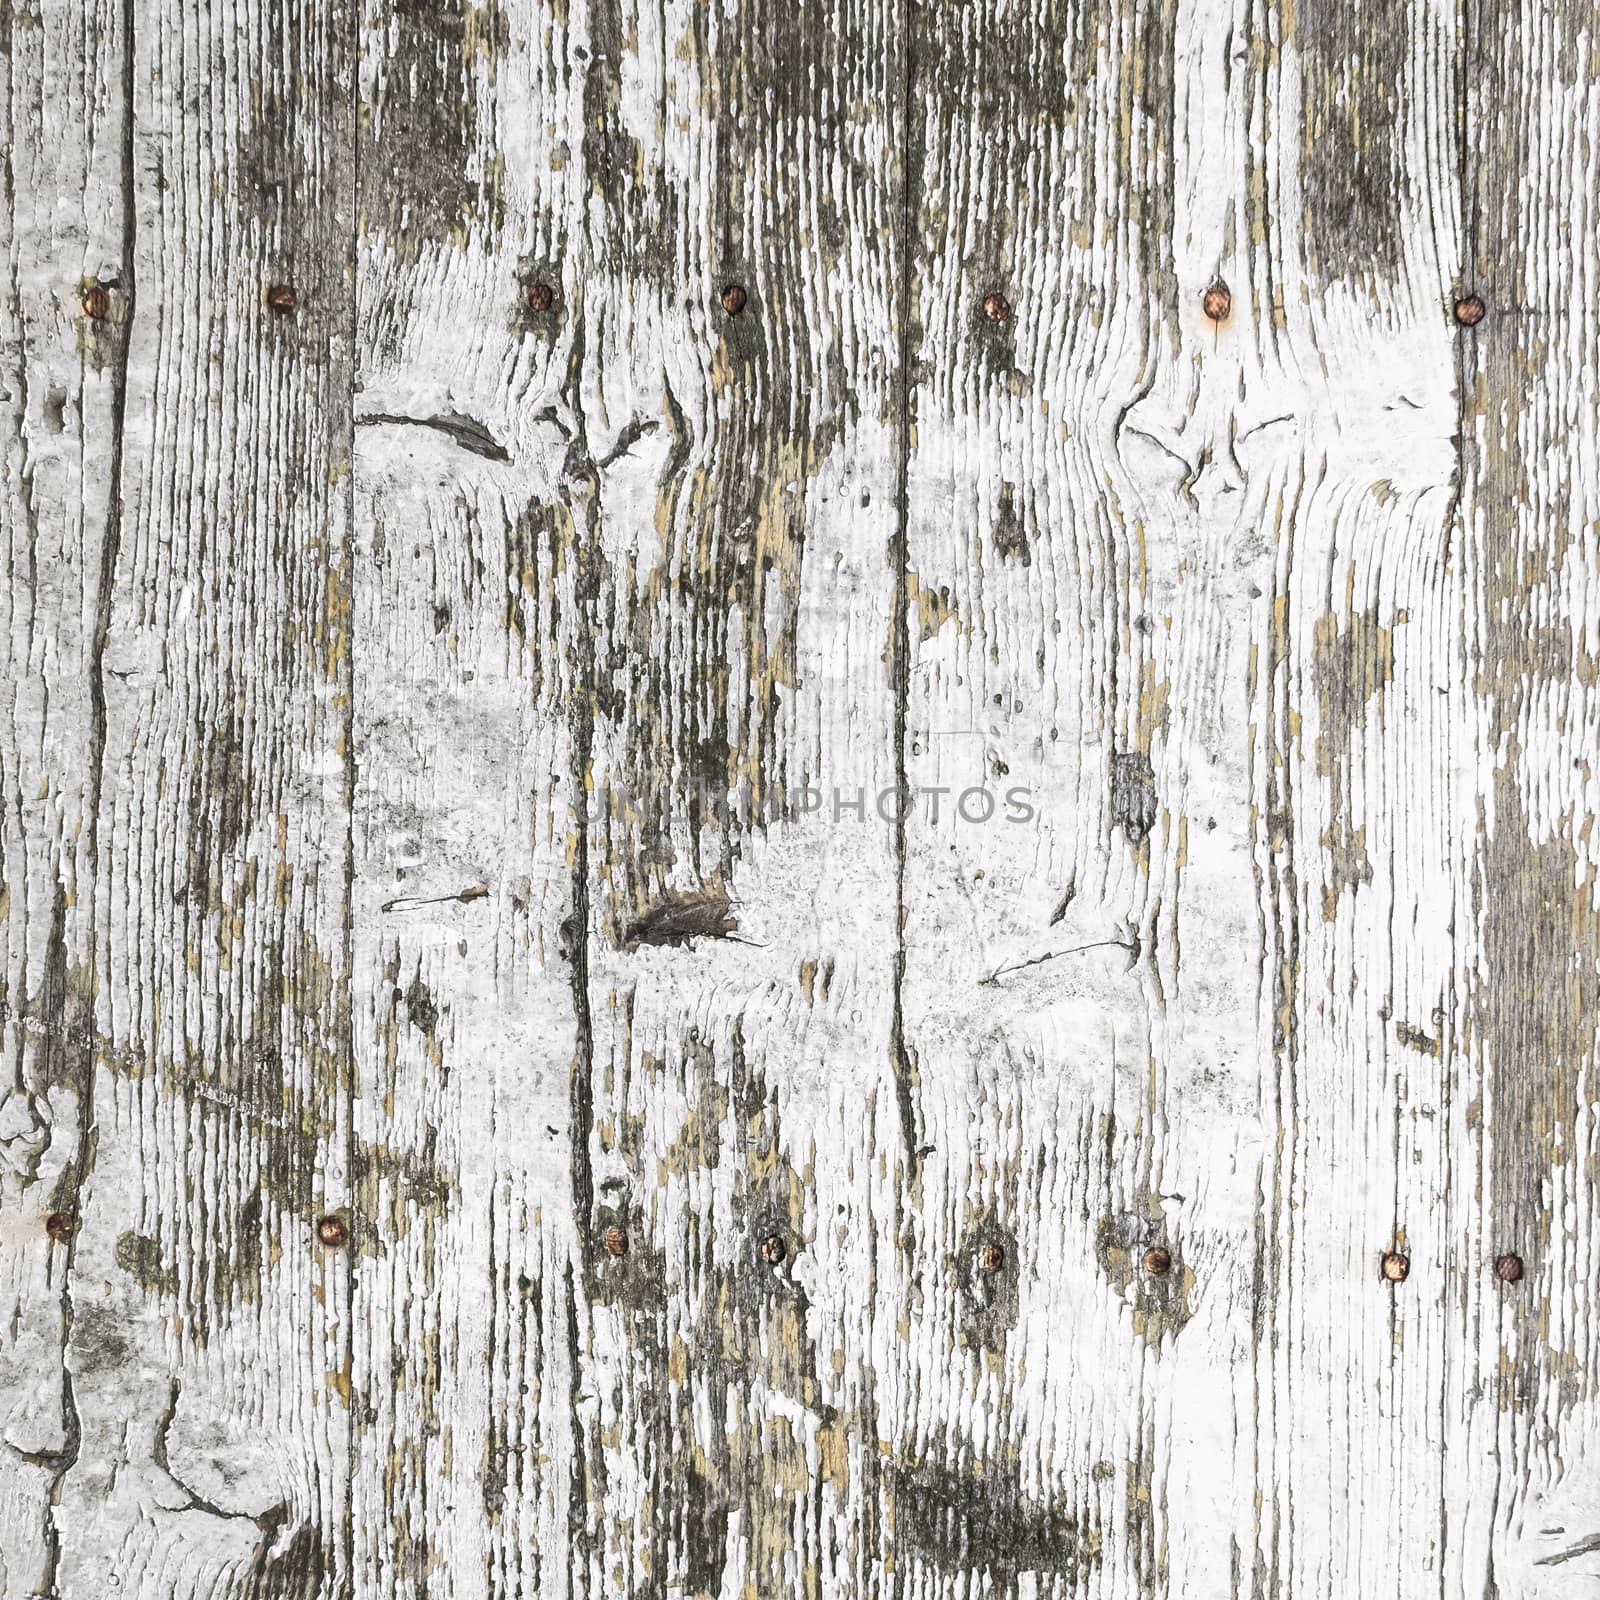 Wooden grungy background by germanopoli